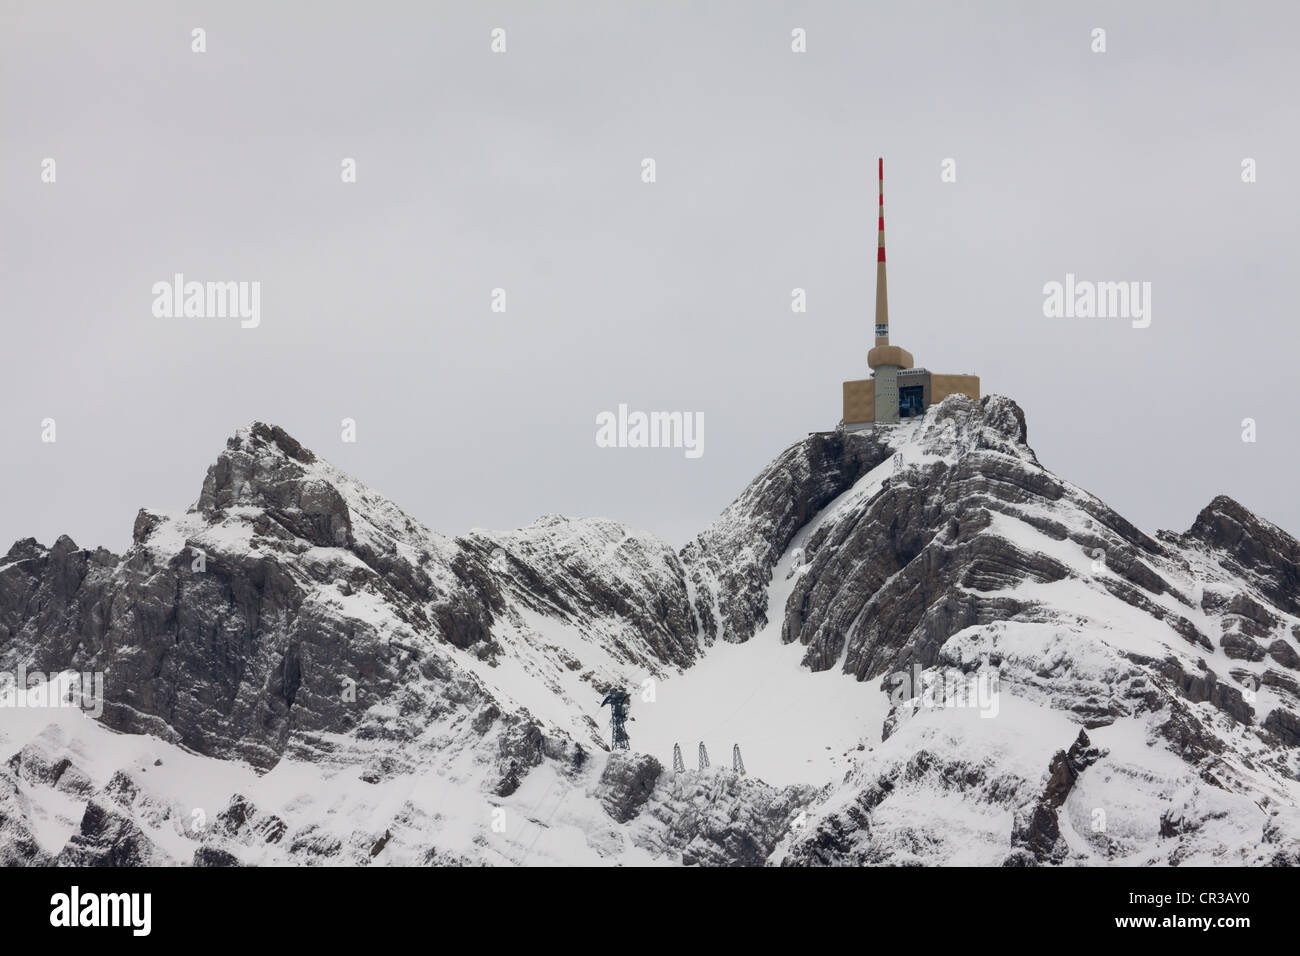 Saentis mountain and the summit station, canton of Appenzell Ausserrhoden, Appenzell Outer Rhodes, Switzerland, Europe Stock Photo